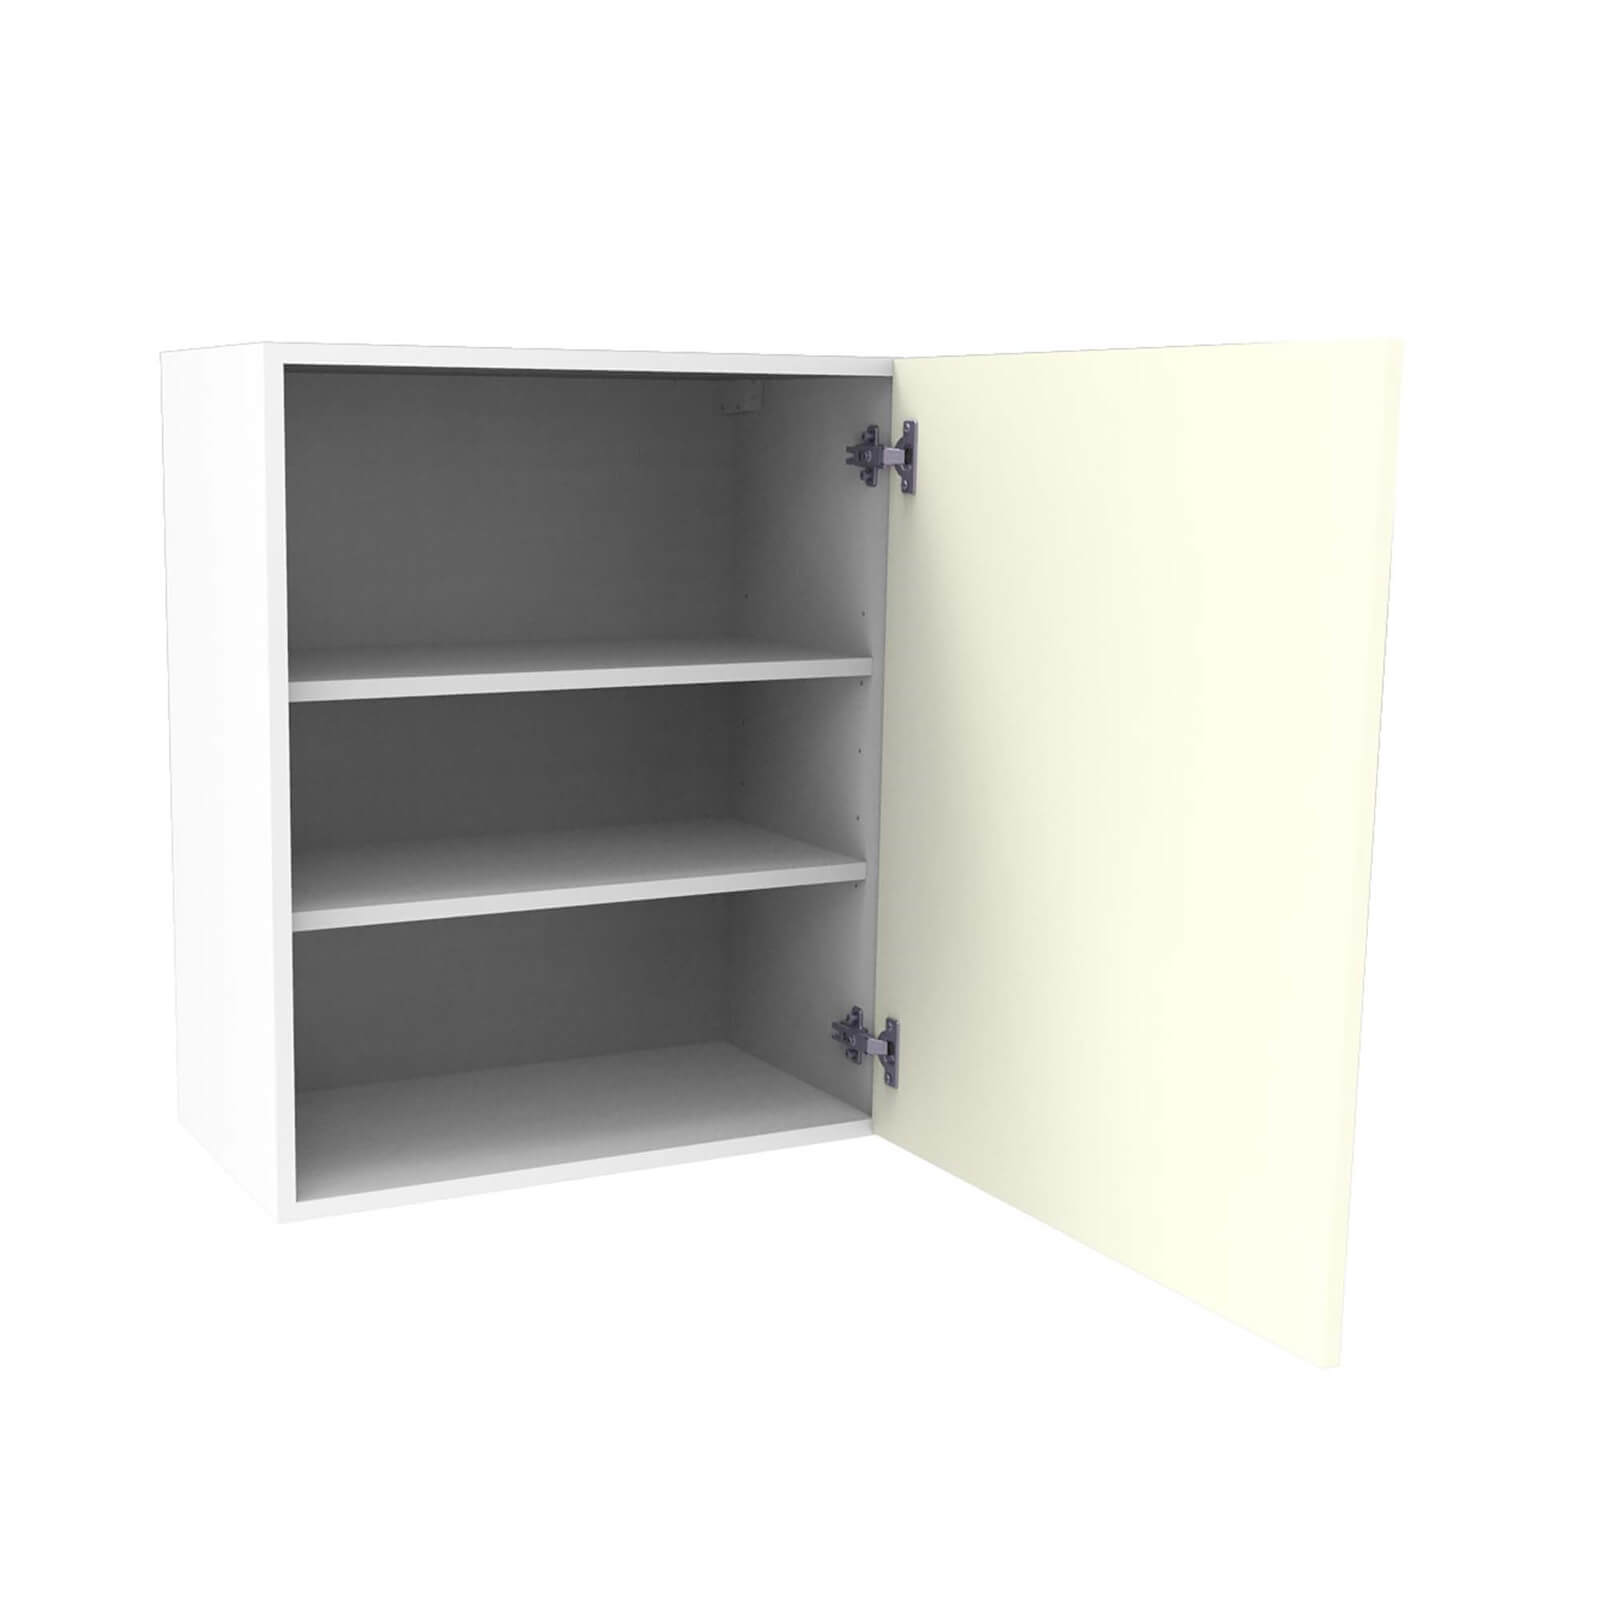 Country Shaker Cream 600mm Wall Unit